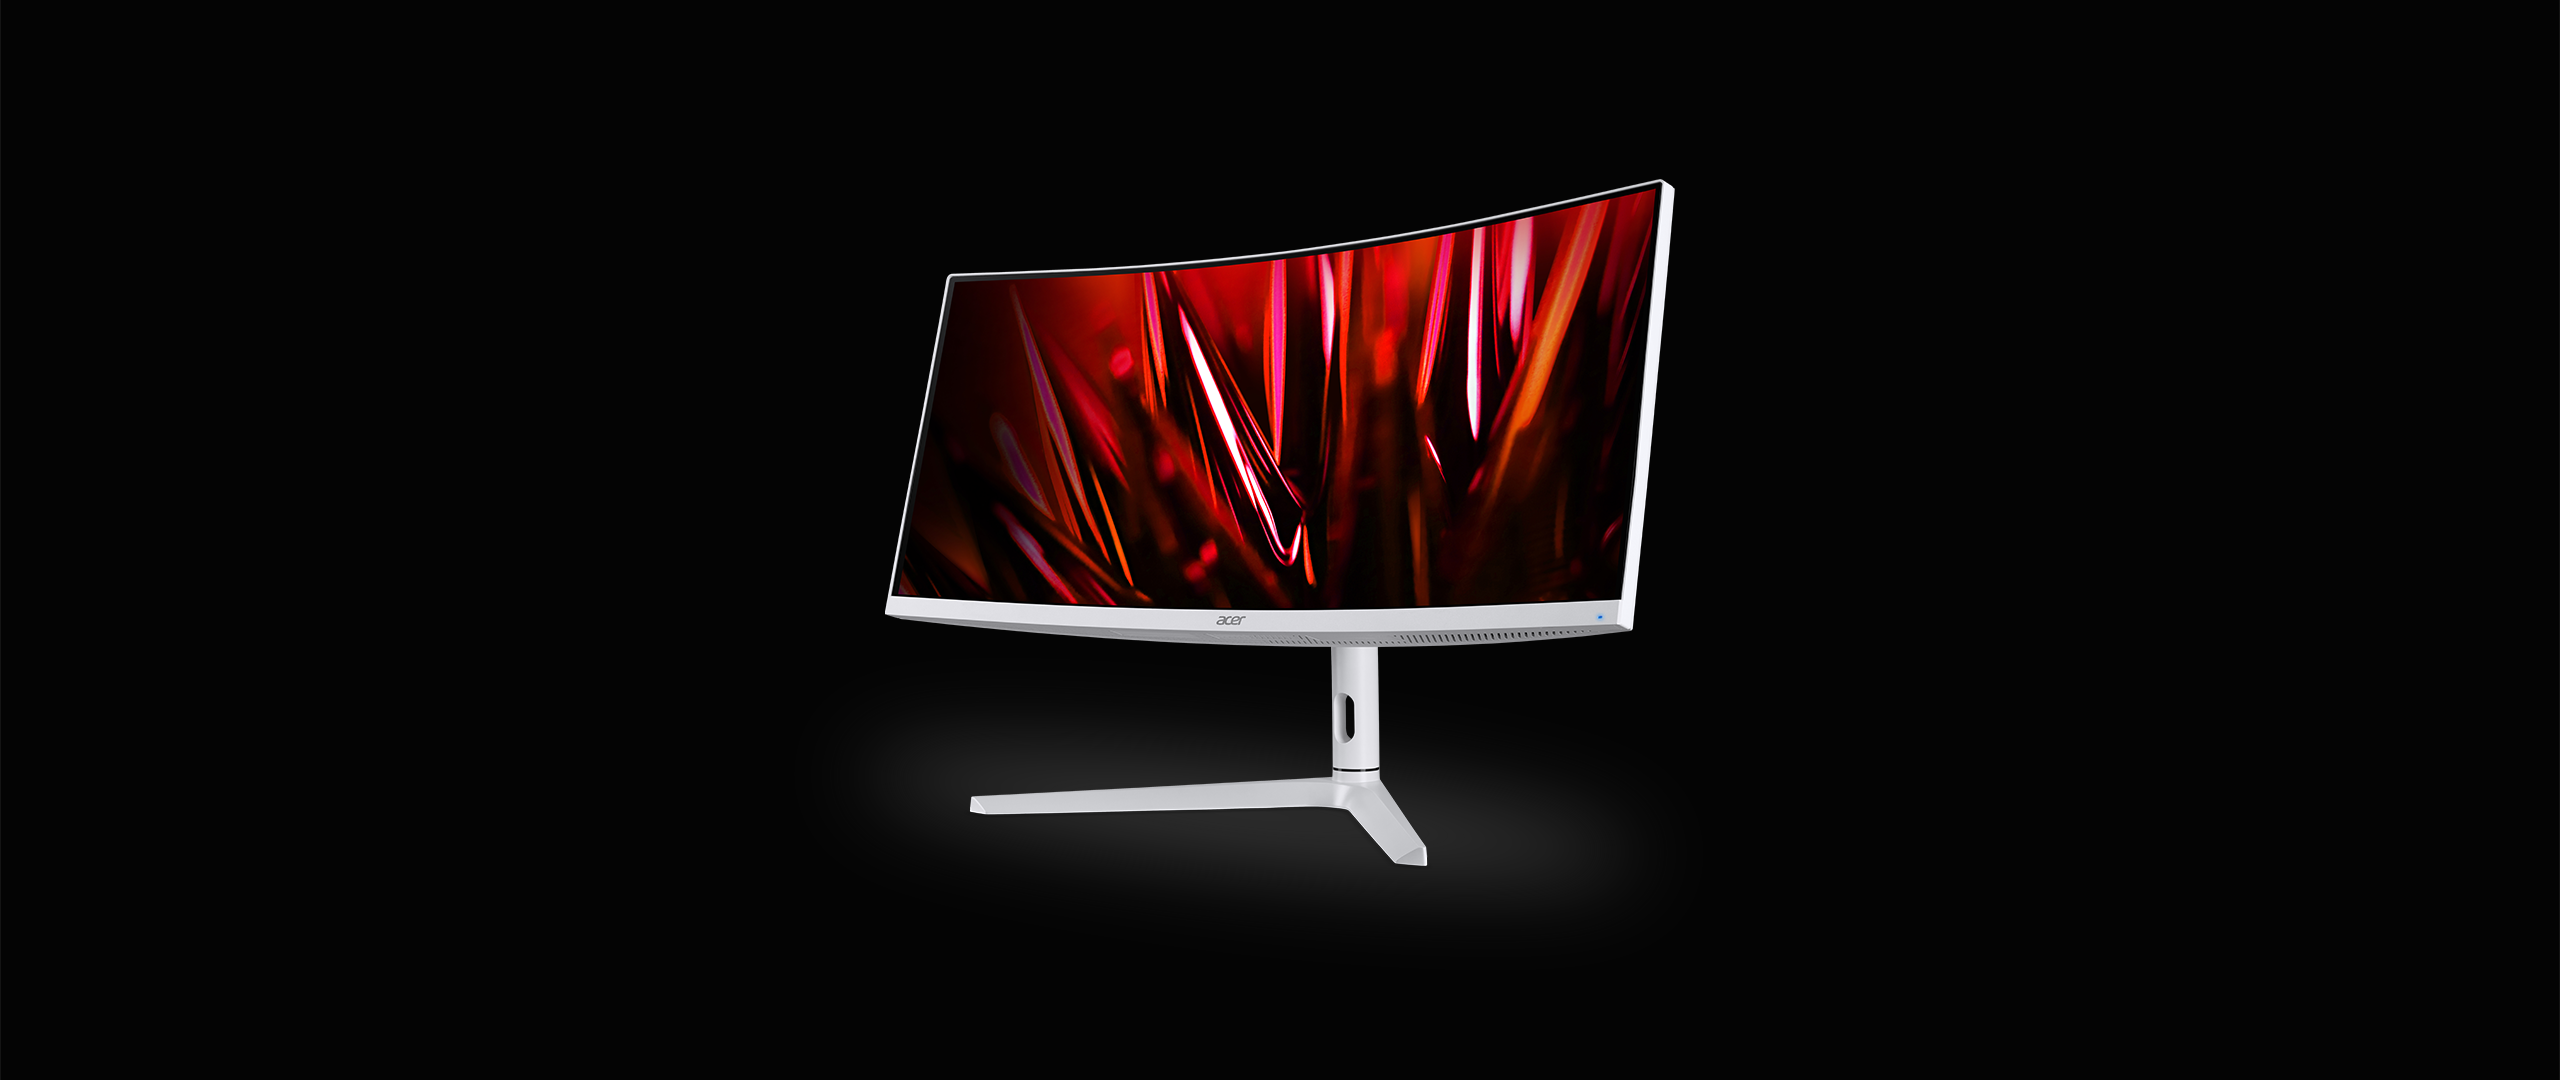 Nitro XZ6 Series | Curved HDR Gaming Monitor | Acer United States